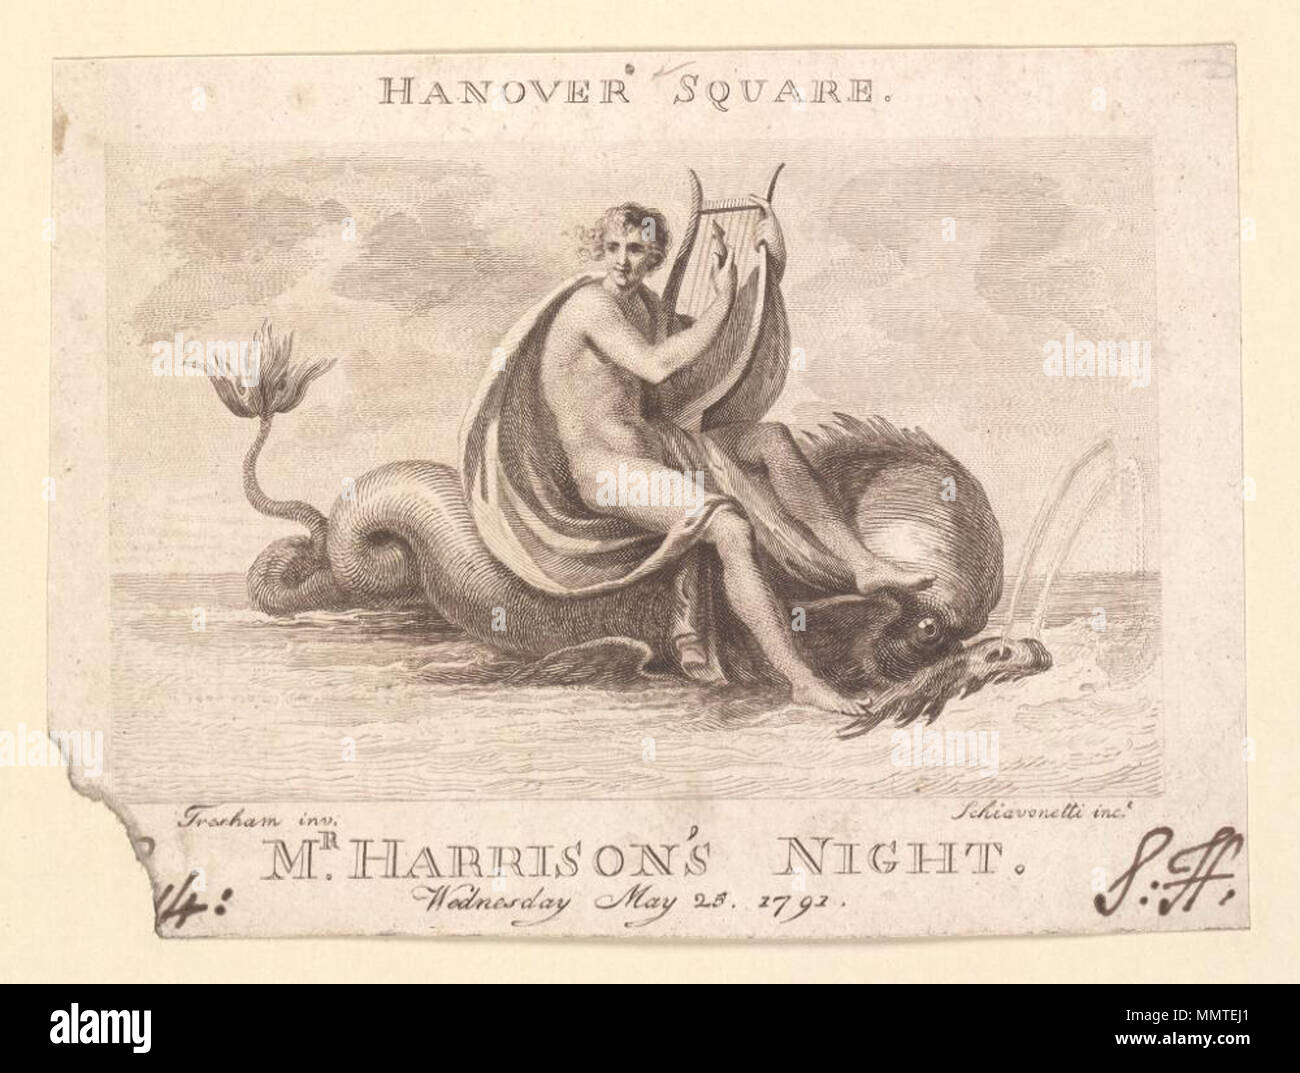 . Ticket of Hanover Square, Wednesday May 25 1791, announcing Mr. Harrison's night; printed in brown ink. Not from same plate as (7a) but same image. Corner torn off; manuscript number: 14(?) at left. Initials in manuscript 'S.H.'; Mr. Harrison's night; [Ticket of Hanover Square, Wednesday May 25 1791, announcing Mr. Harrison's night ]  [Ticket of Hanover Square, Wednesday May 25 1791, announcing Mr. Harrison's night ]. 25 May 1791. Hanover Square ([London], England) [author] Bodleian Libraries, Ticket of Hanover Square, Wednesday May 25 1791, announcing Mr. Harrison's night Stock Photo